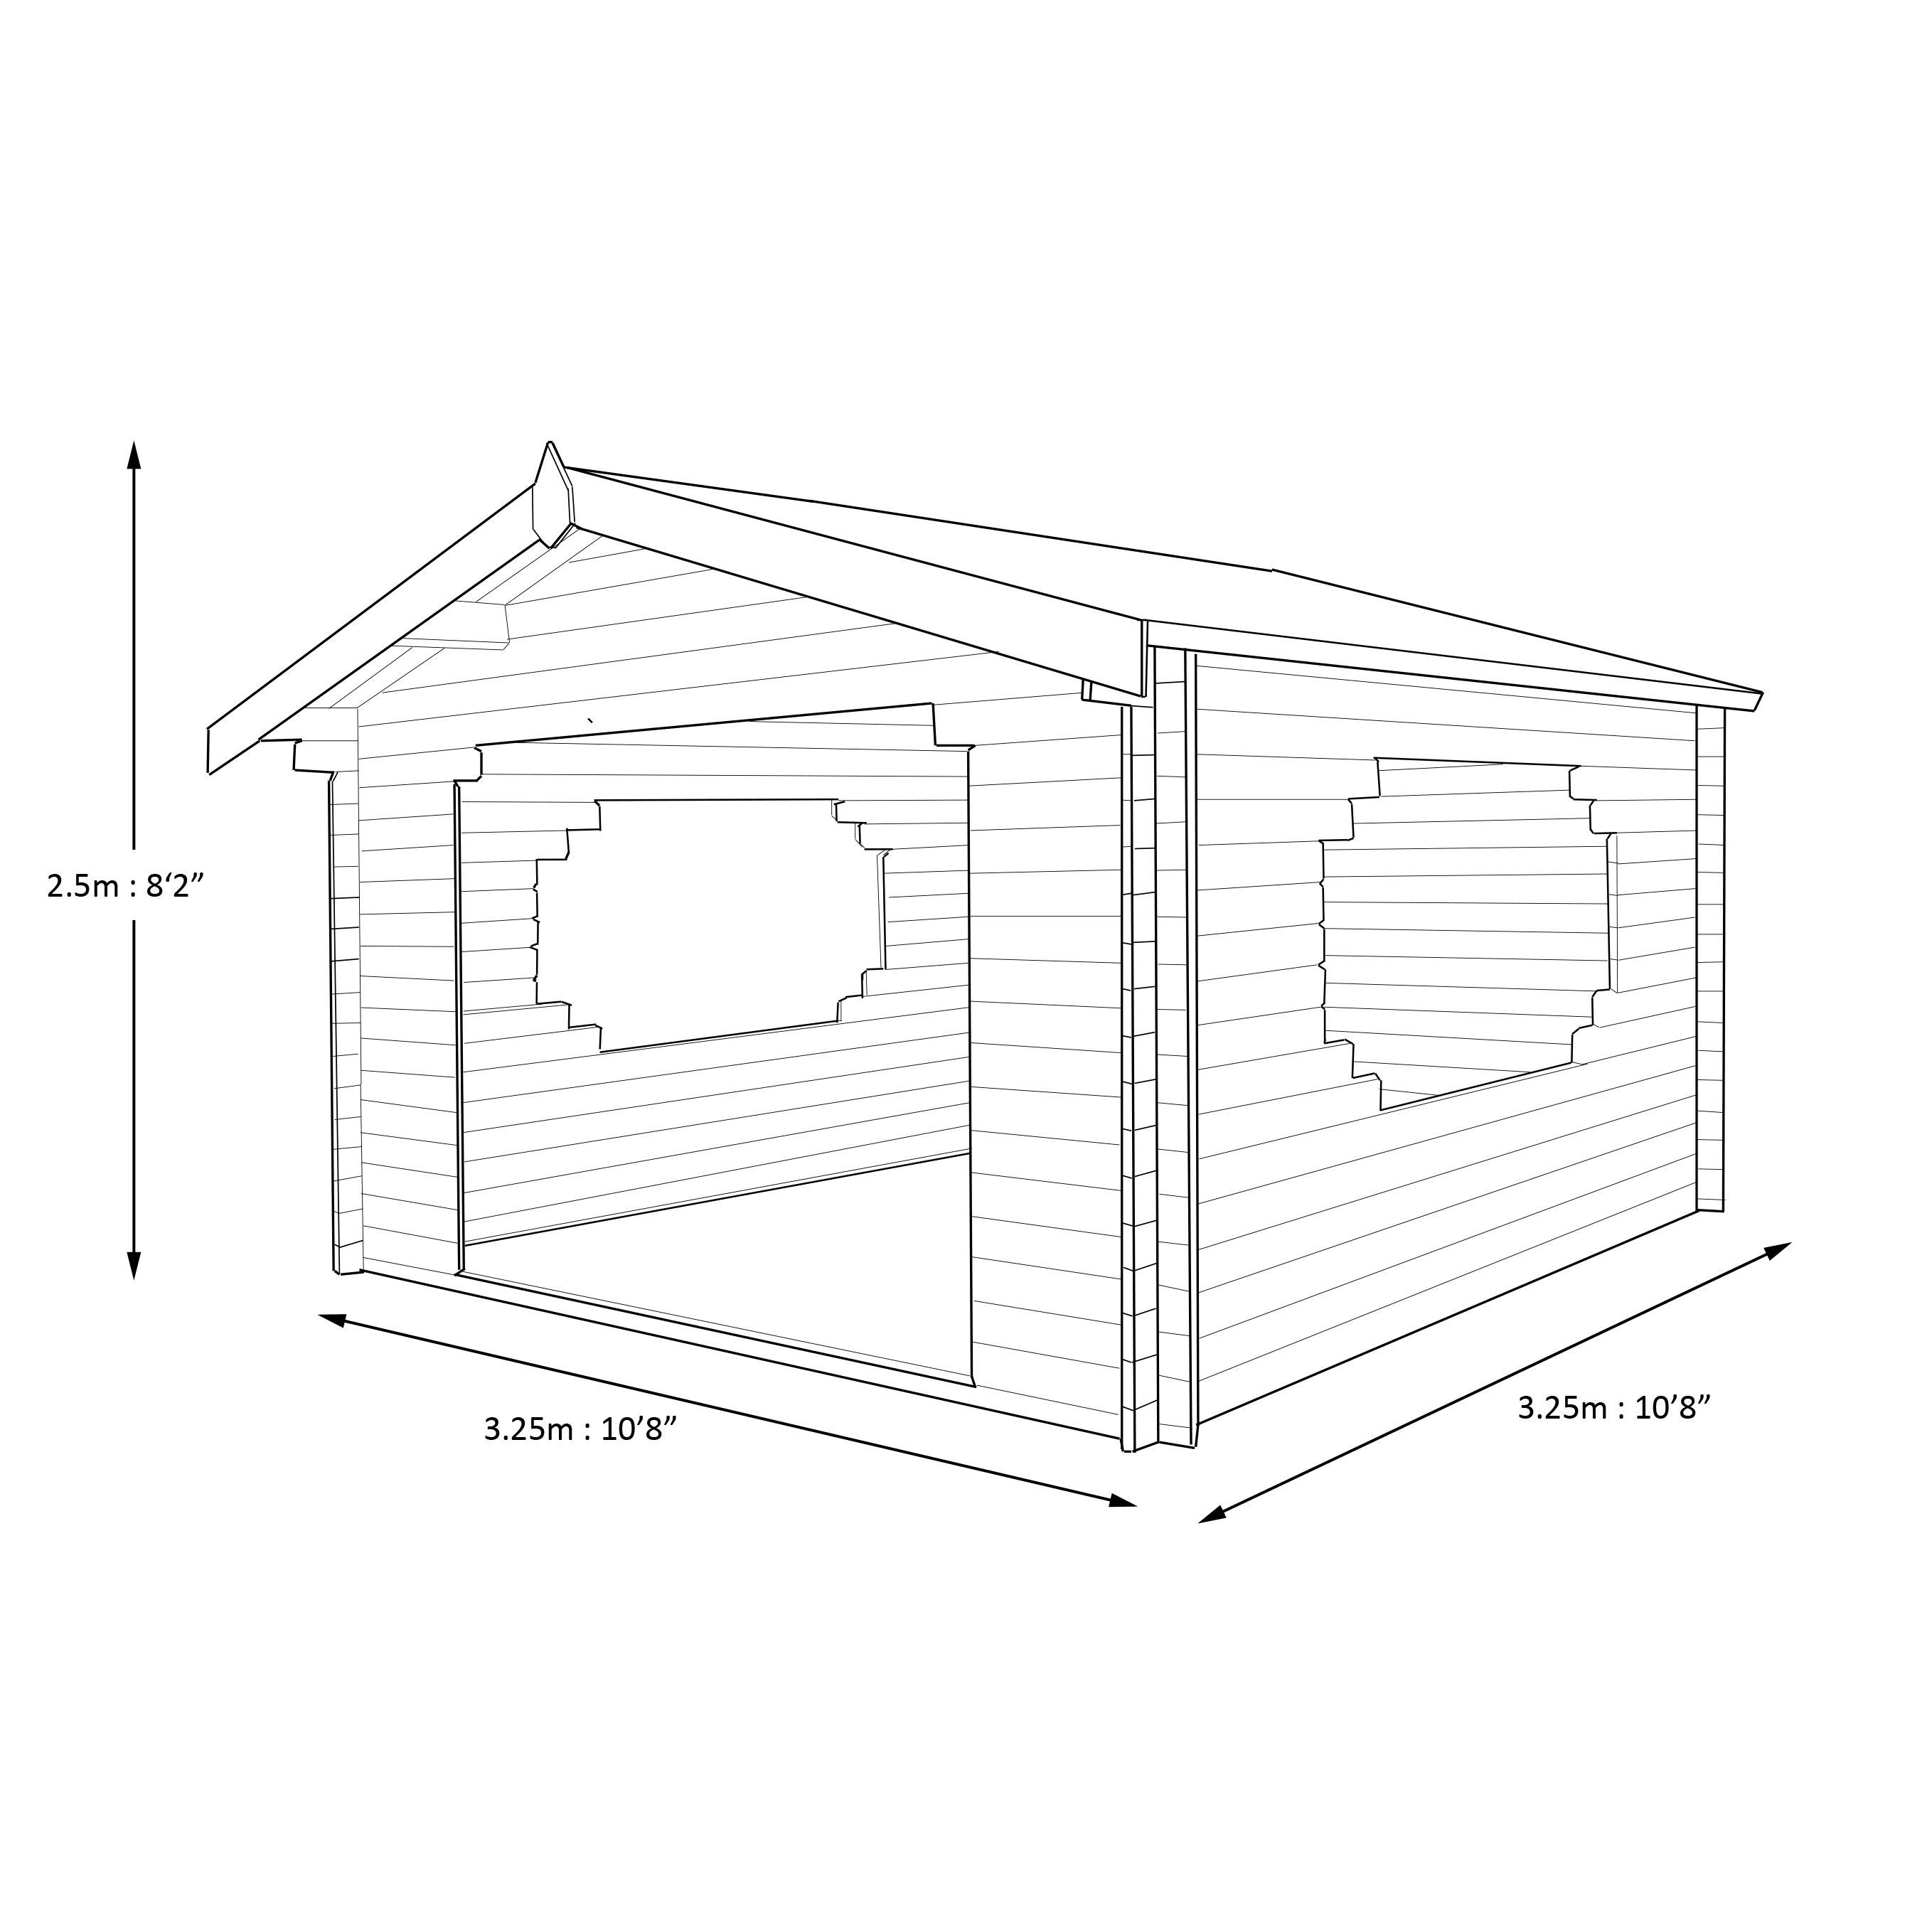 Shire Bere 11x11 ft Apex Tongue & groove Wooden Cabin - Assembly service included